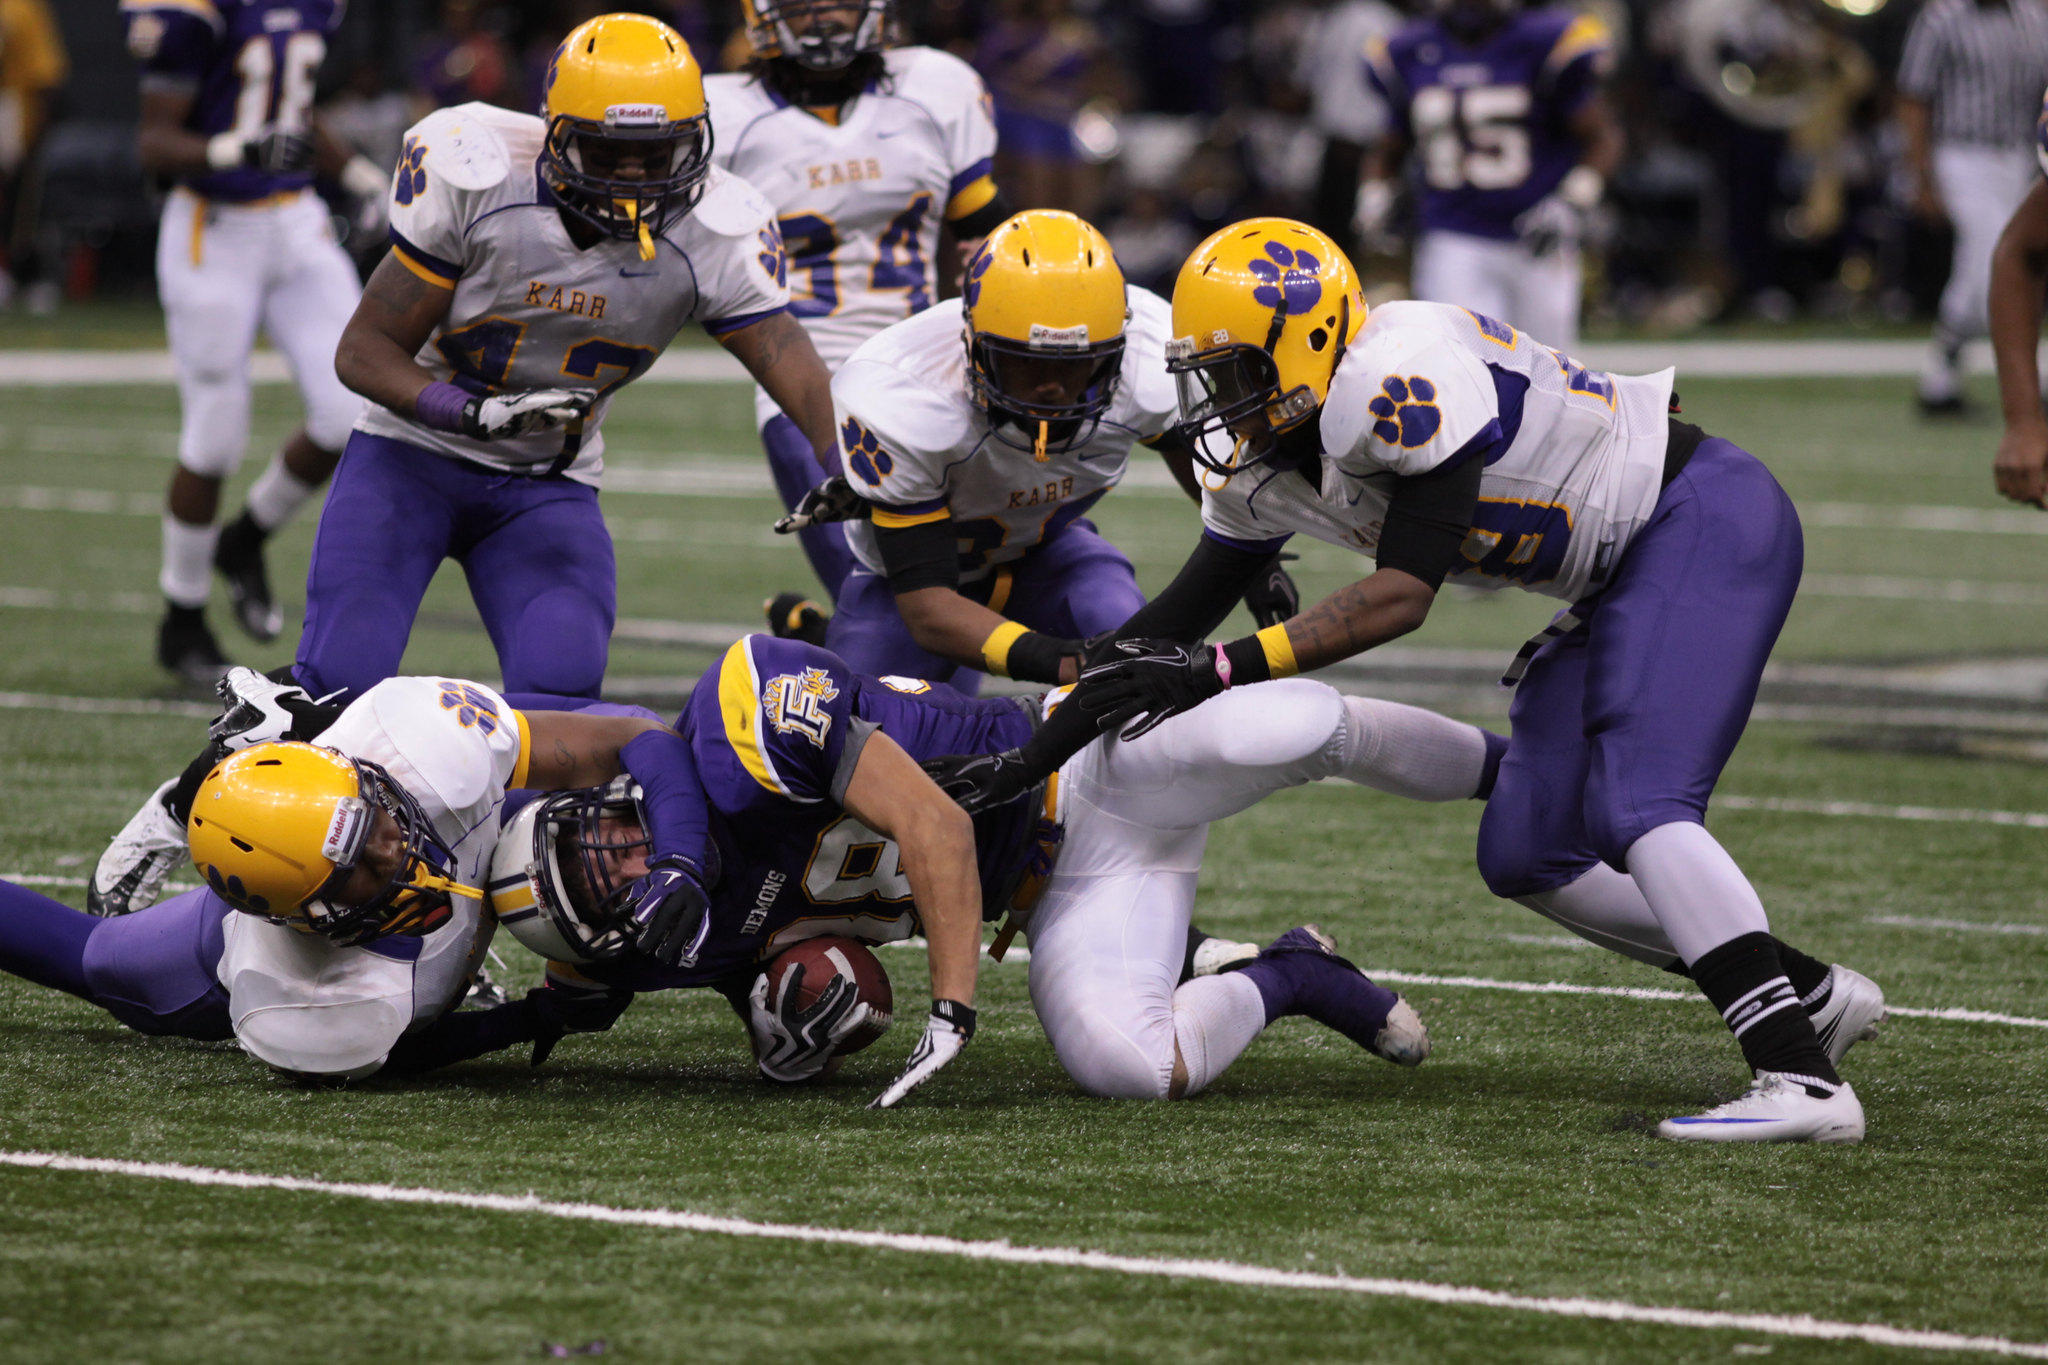 LHSAA Says No High School Football Games Until Louisiana Reaches Phase 4 | WRKF